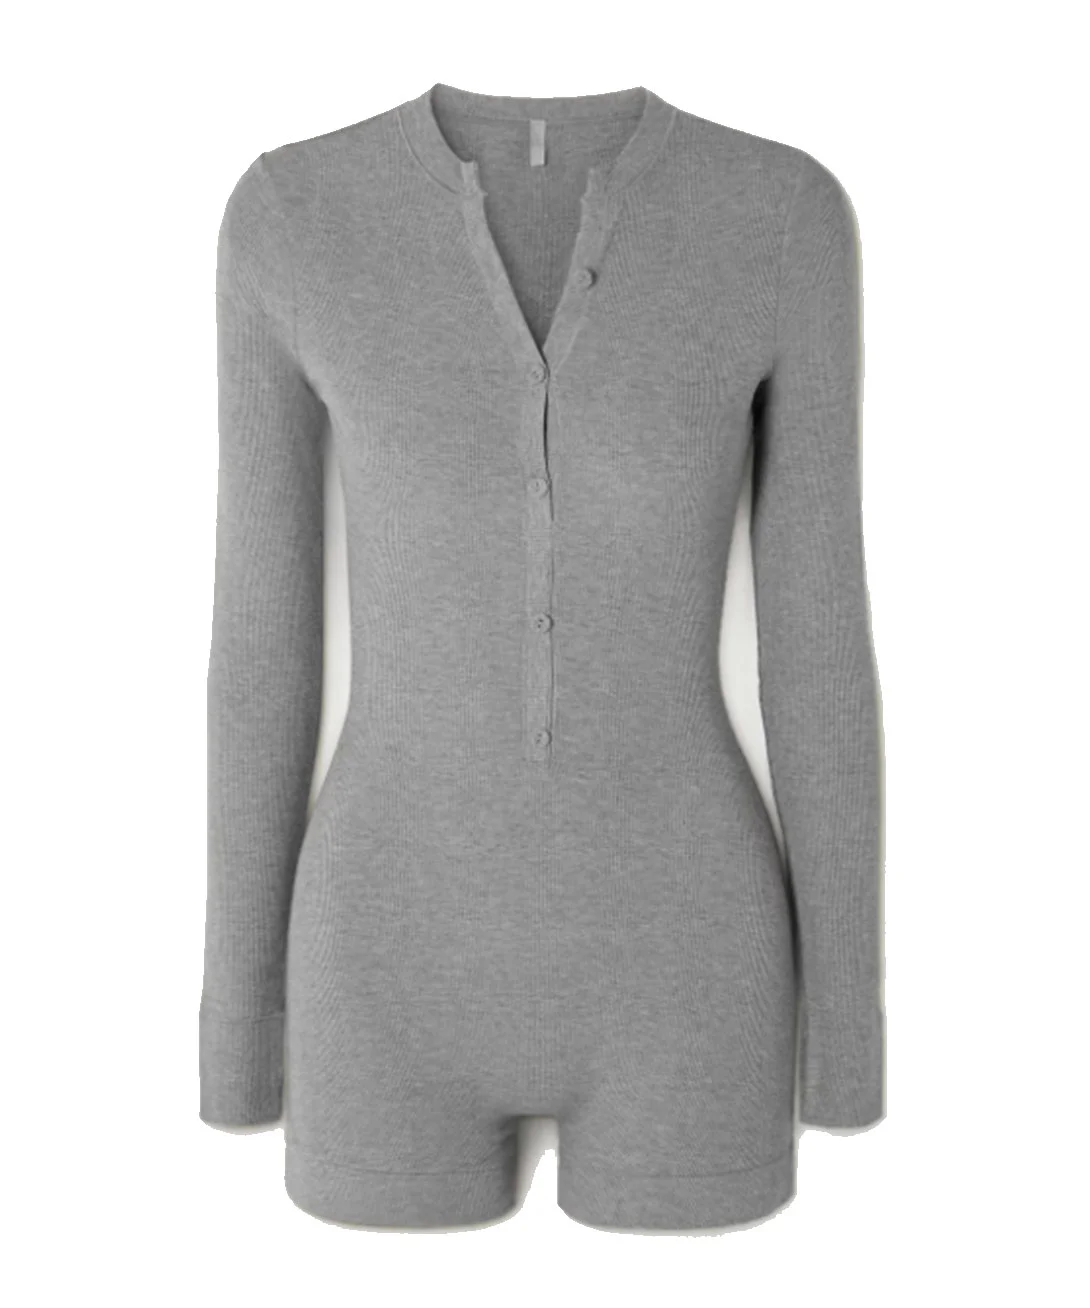 Skims Ribbed Stretch-modal Jersey Lounge Set in Gray